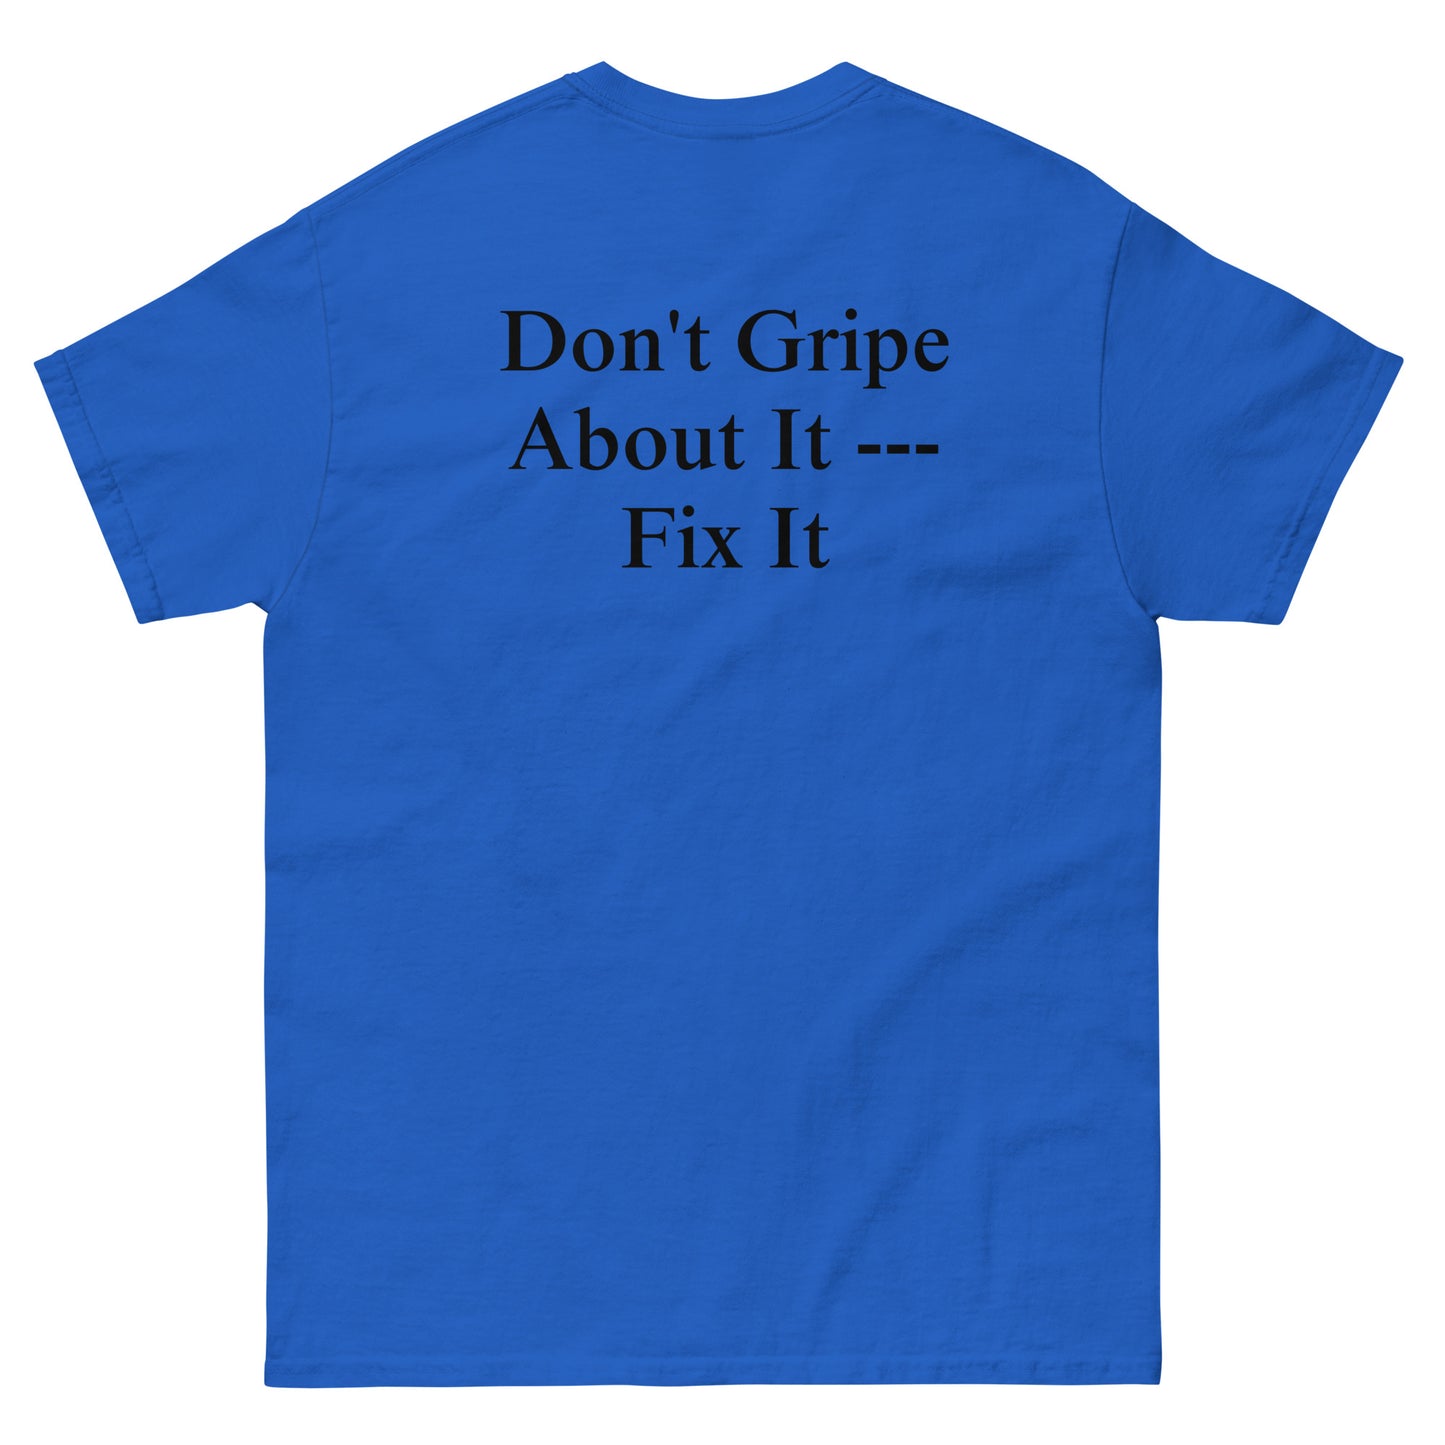 QLE Tee - Don't Gripe About It